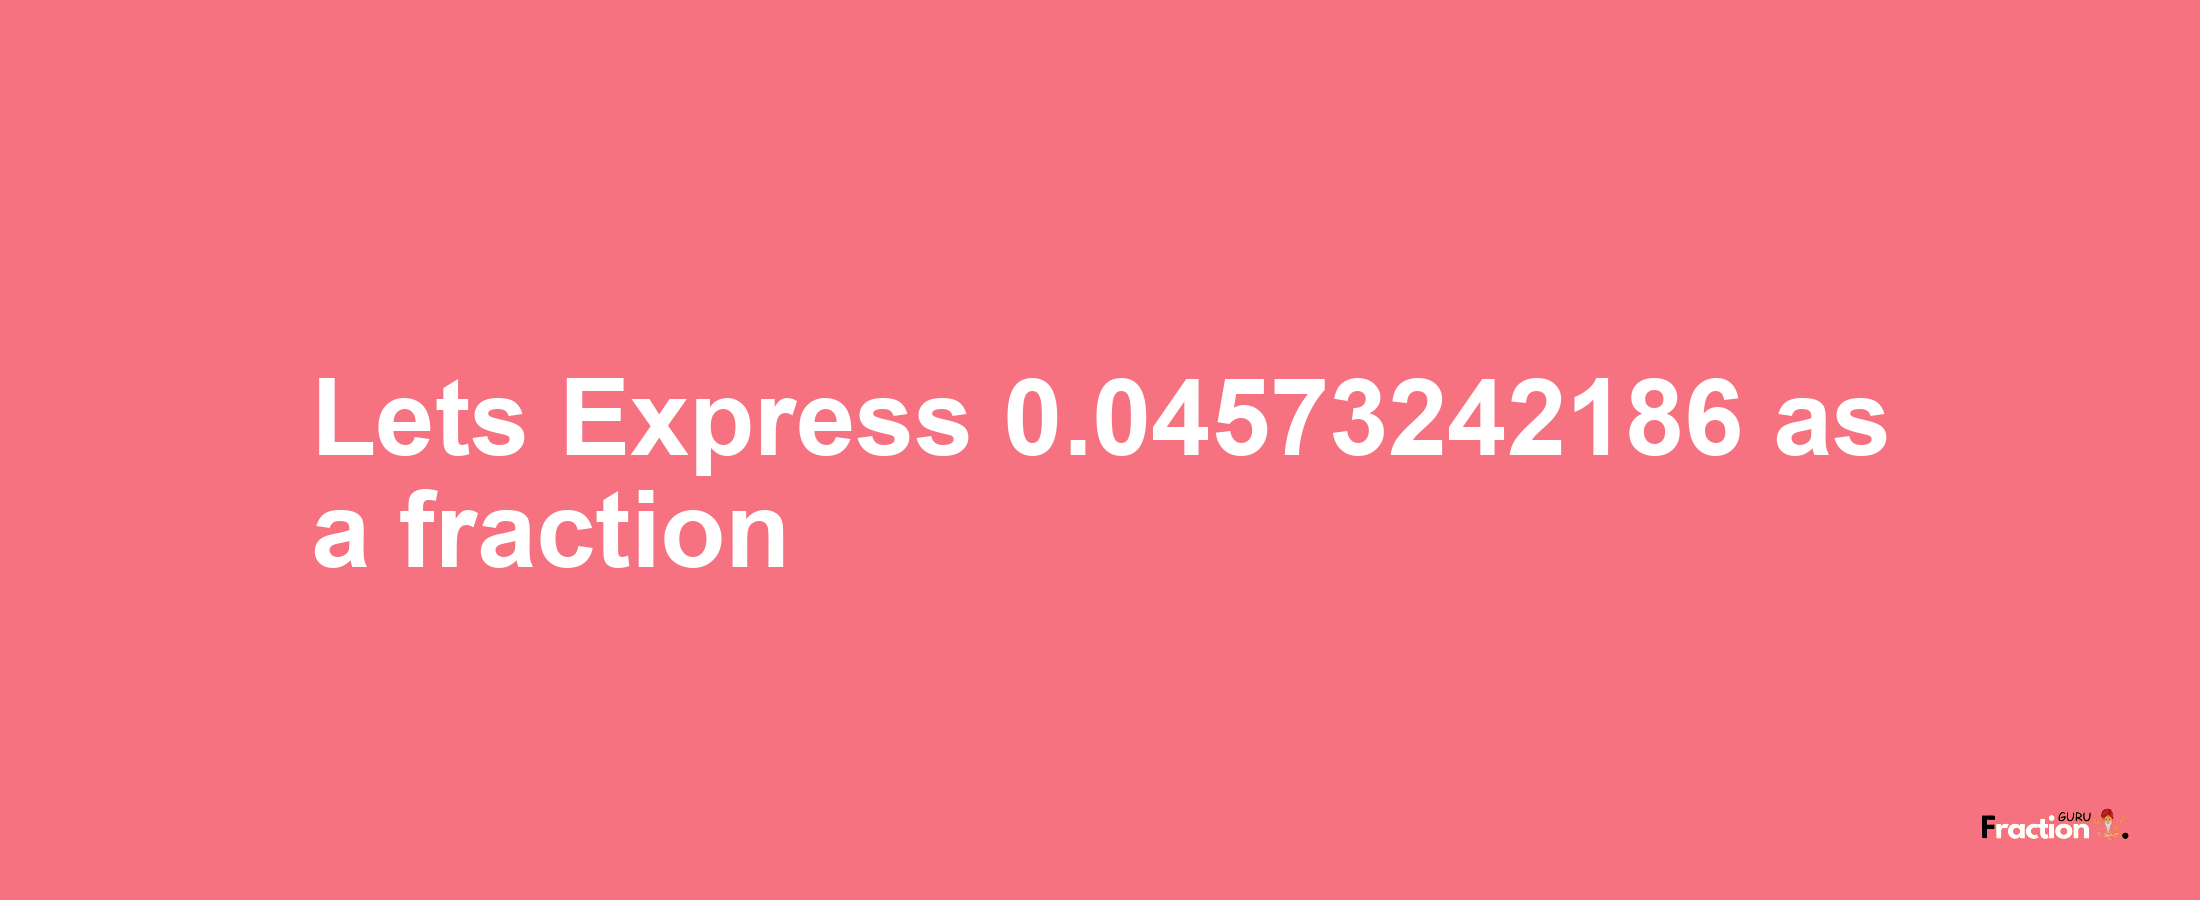 Lets Express 0.04573242186 as afraction